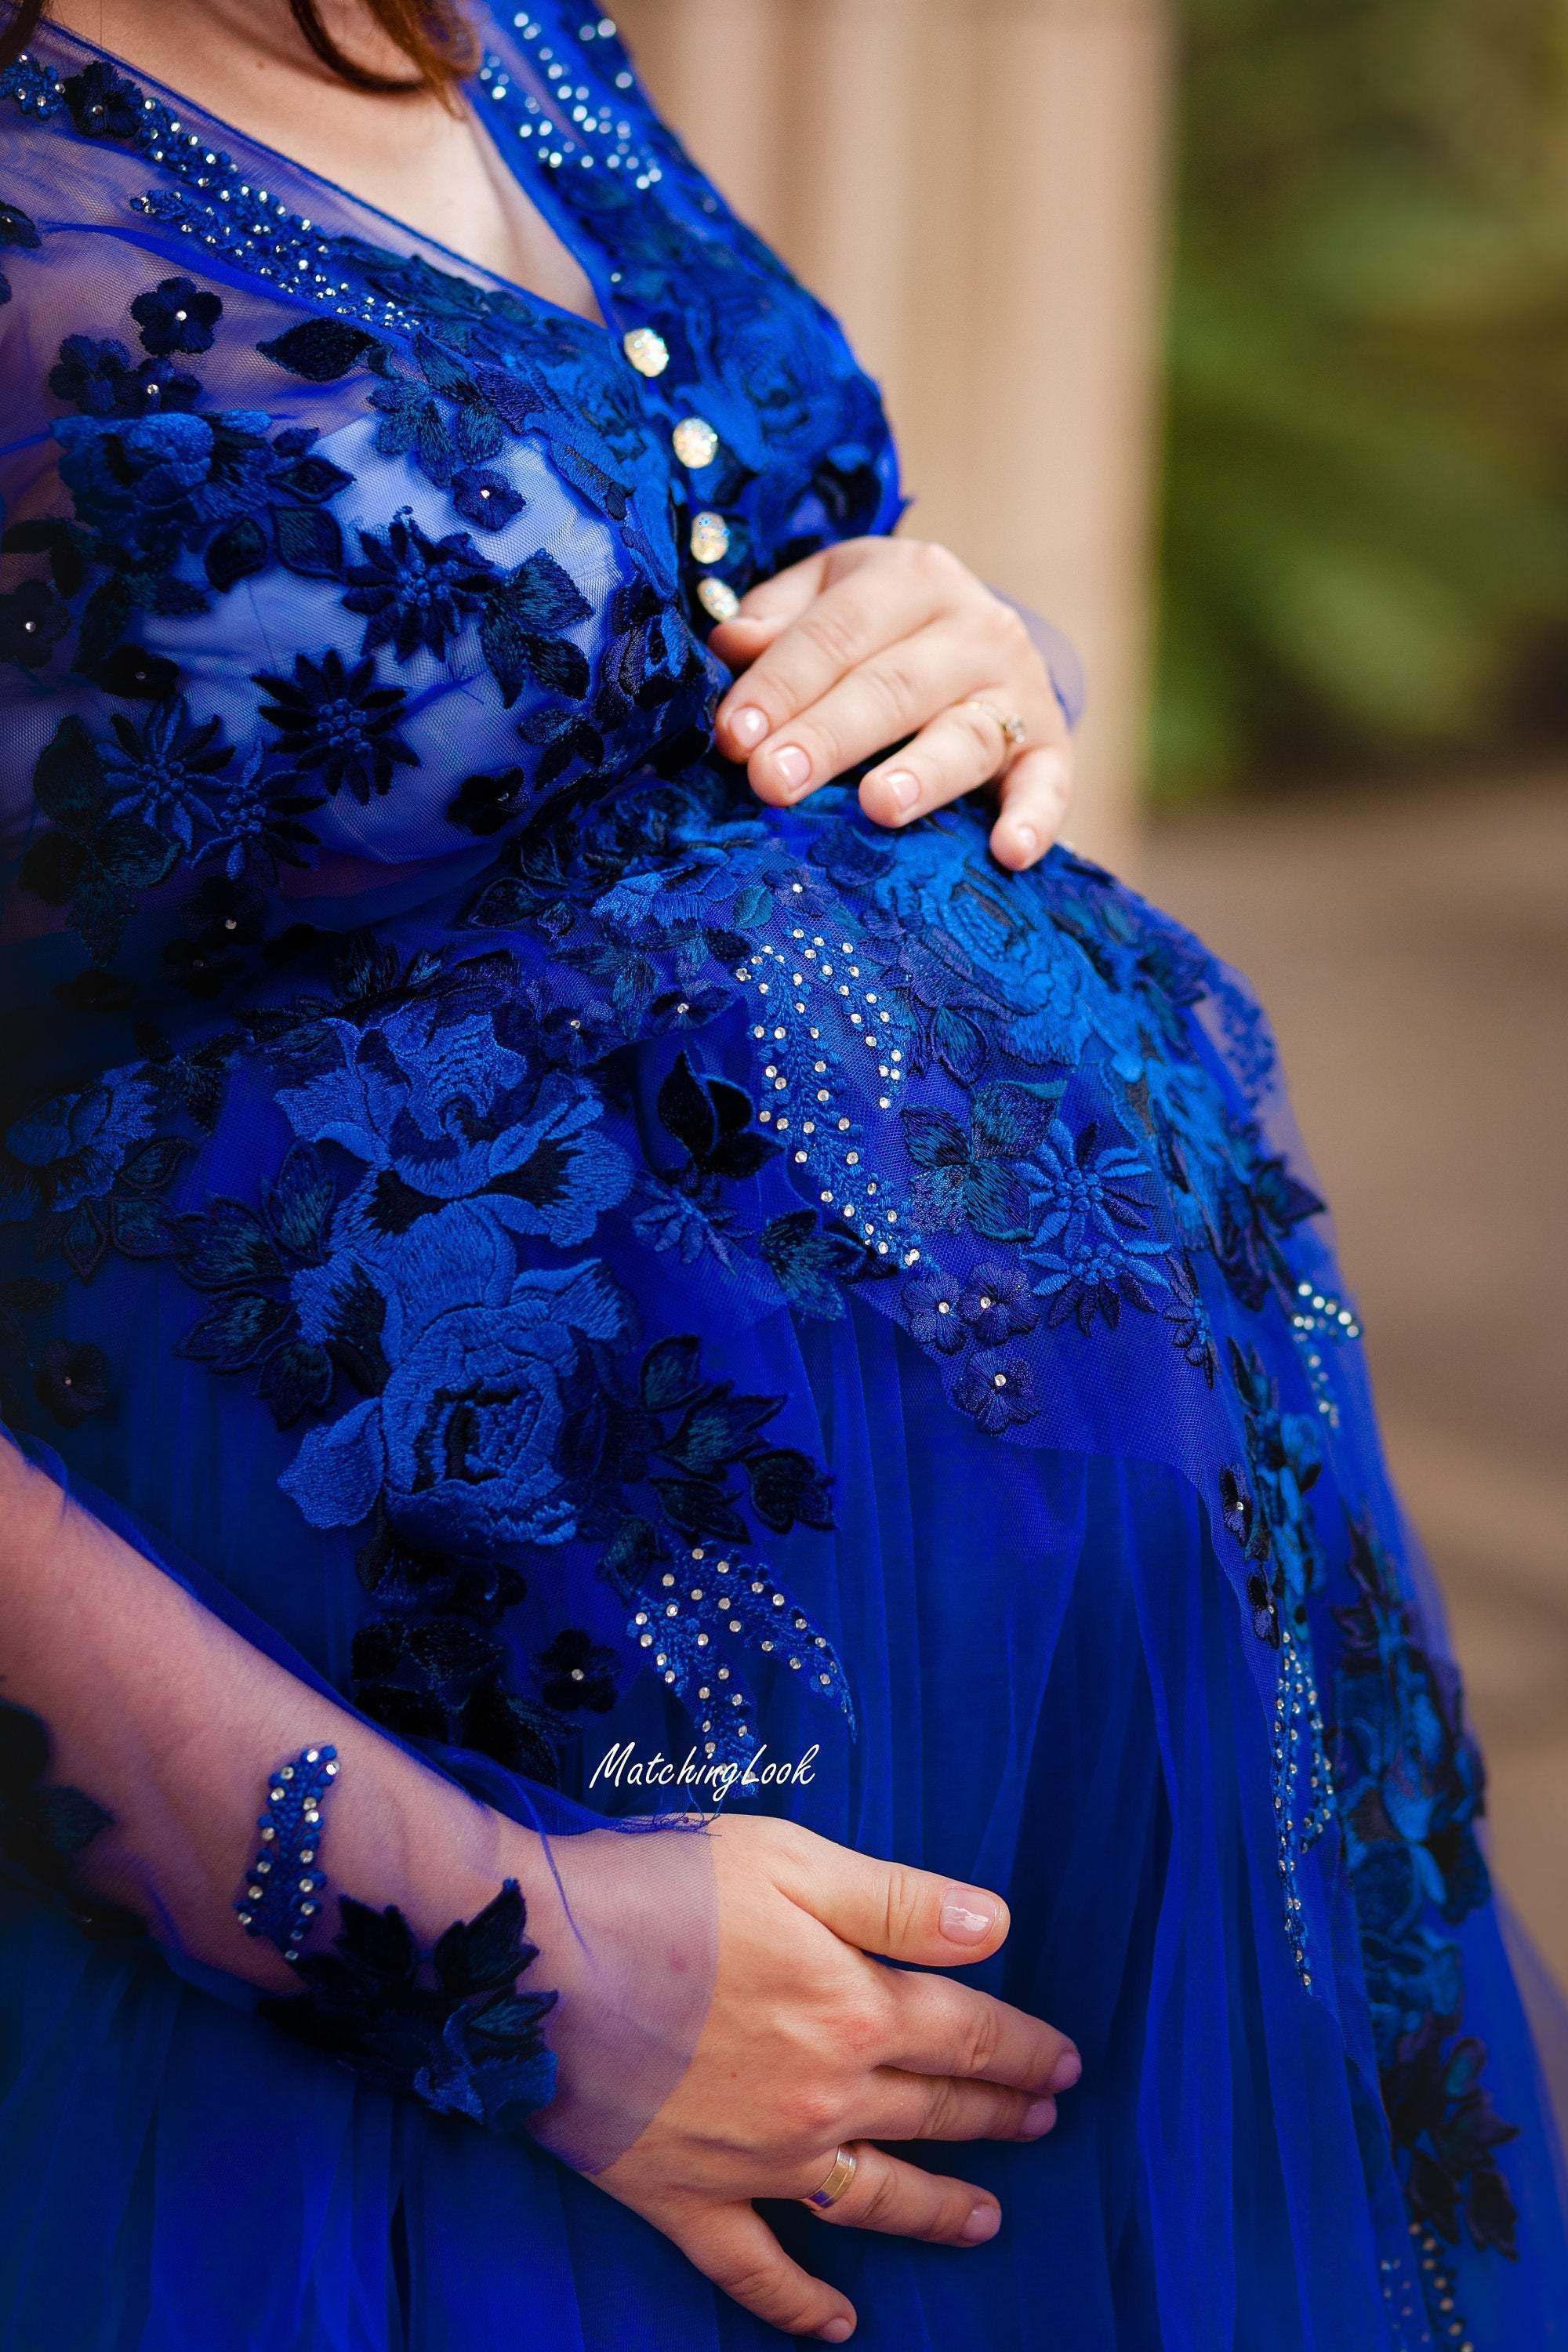 Buy Maternity Clothes, Pregnancy And Nursing Wear Online In India. – ShObO